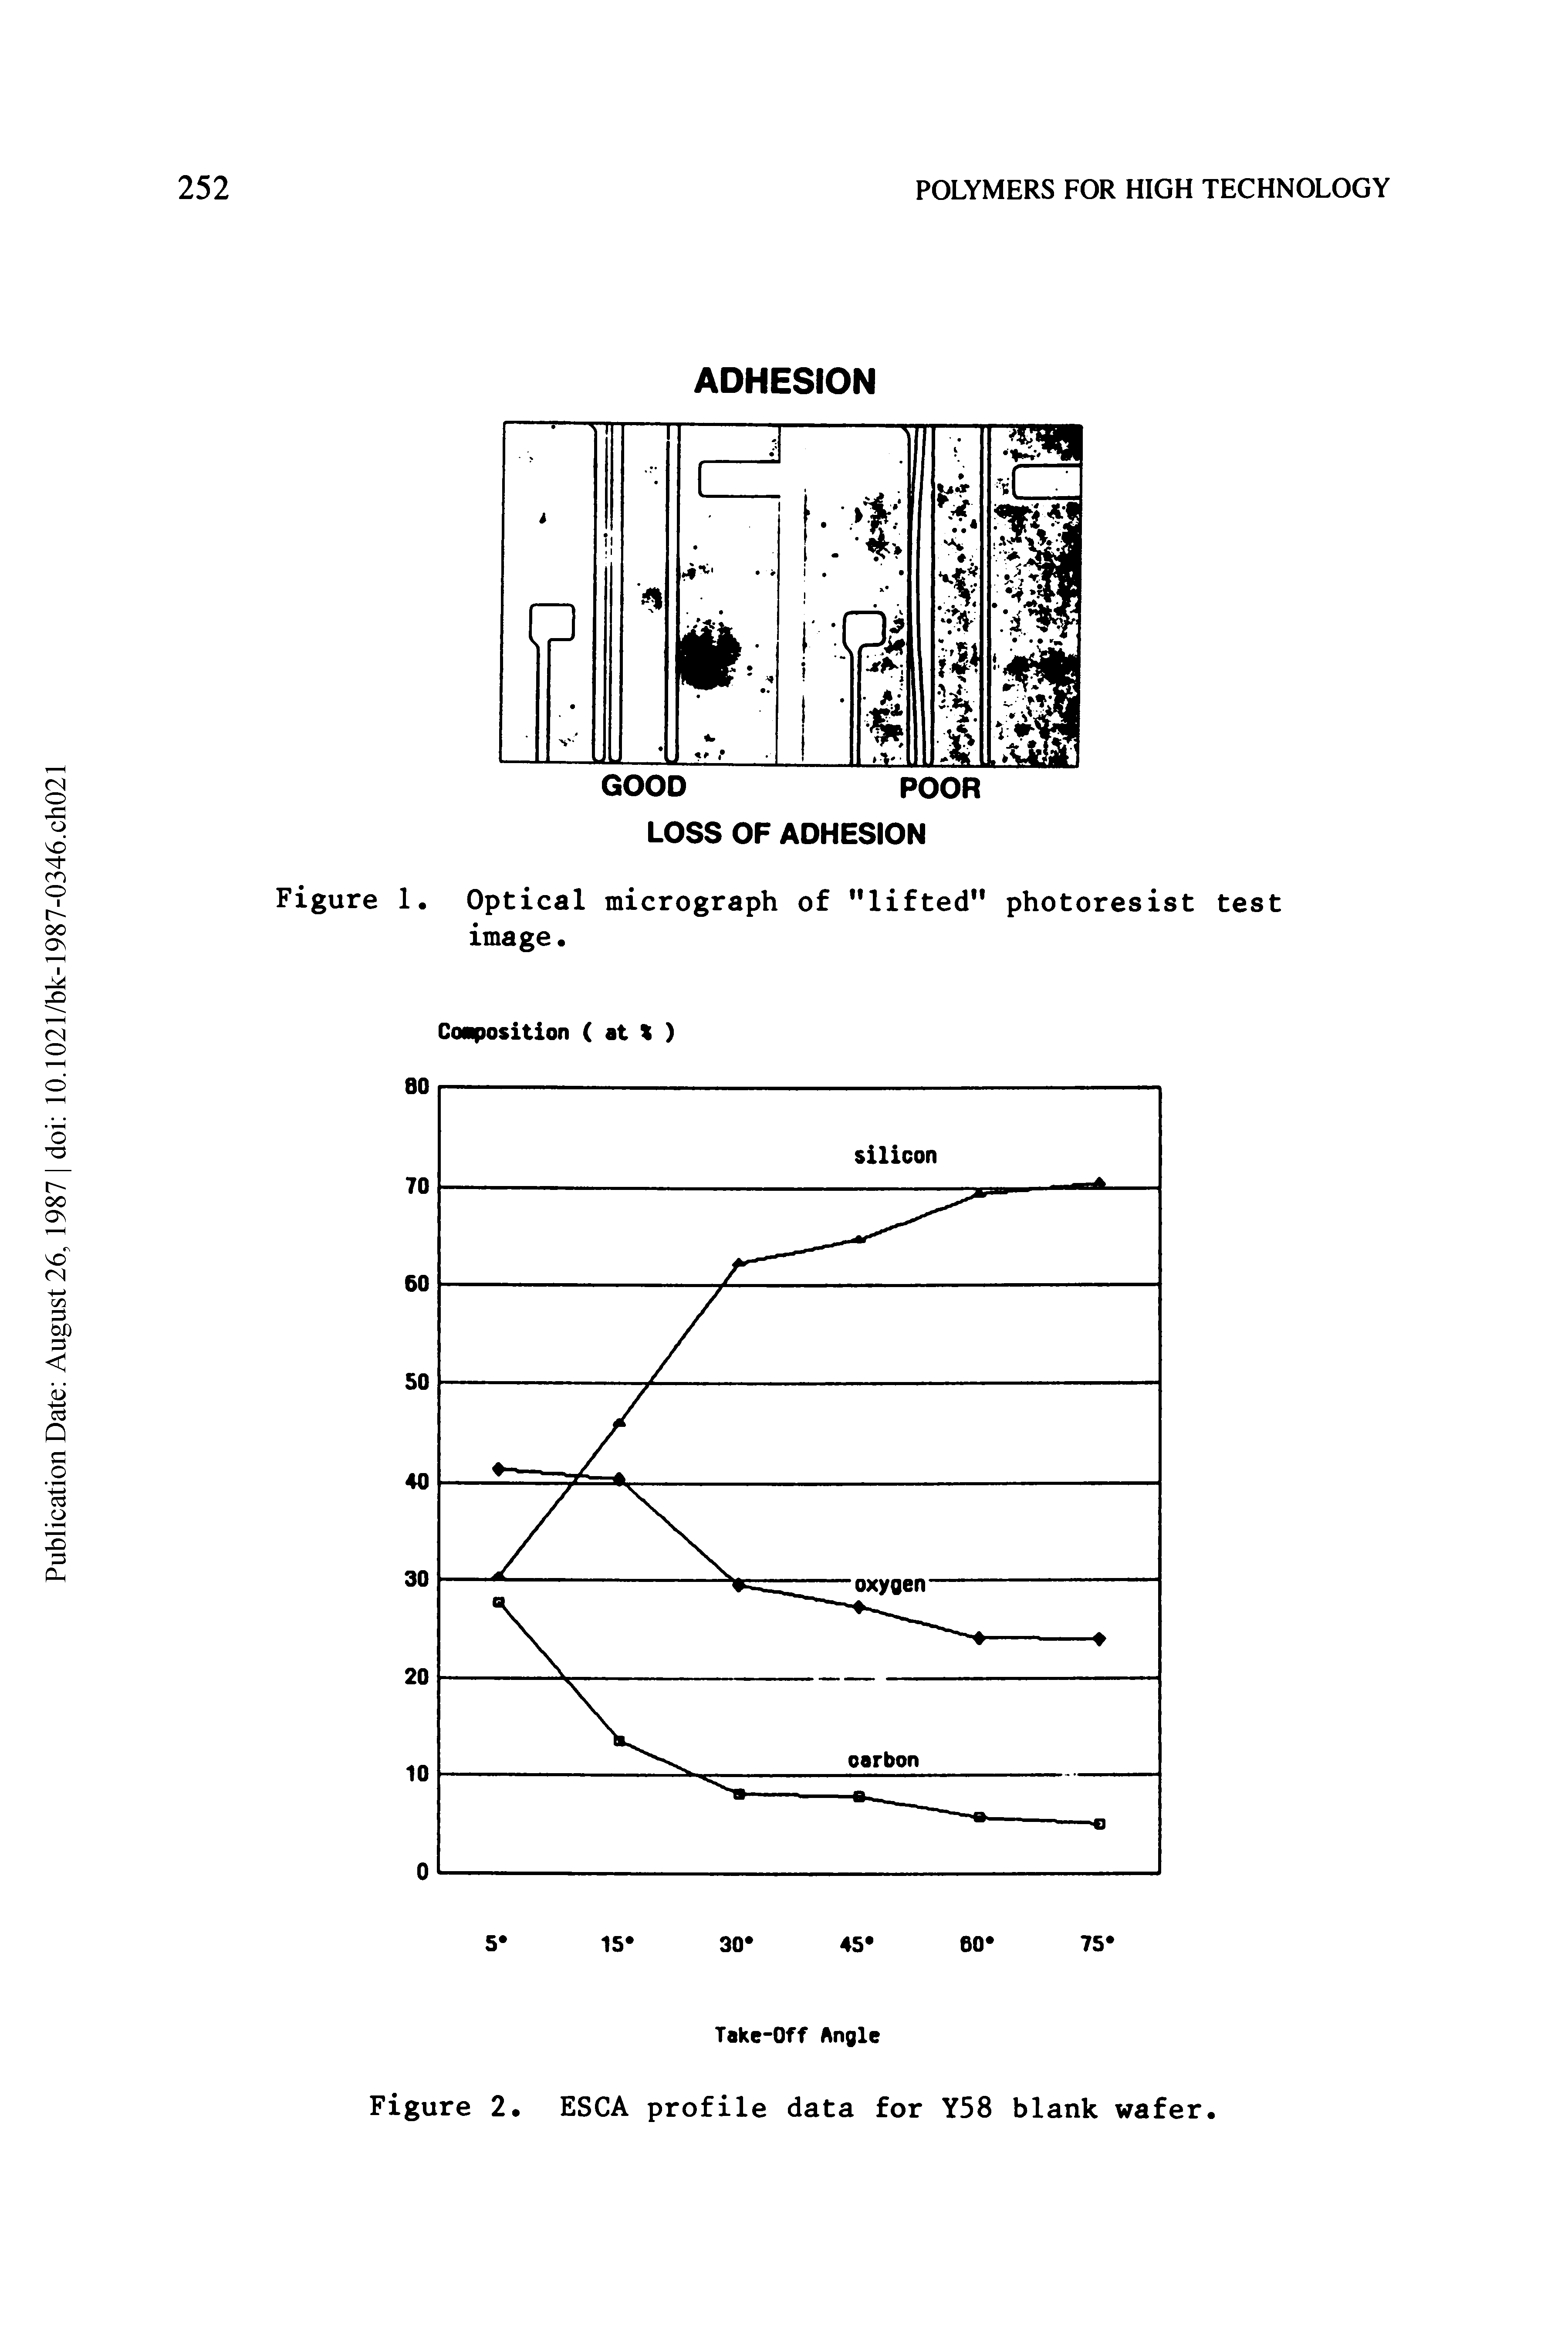 Figure 1. Optical micrograph of "lifted photoresist test image ...